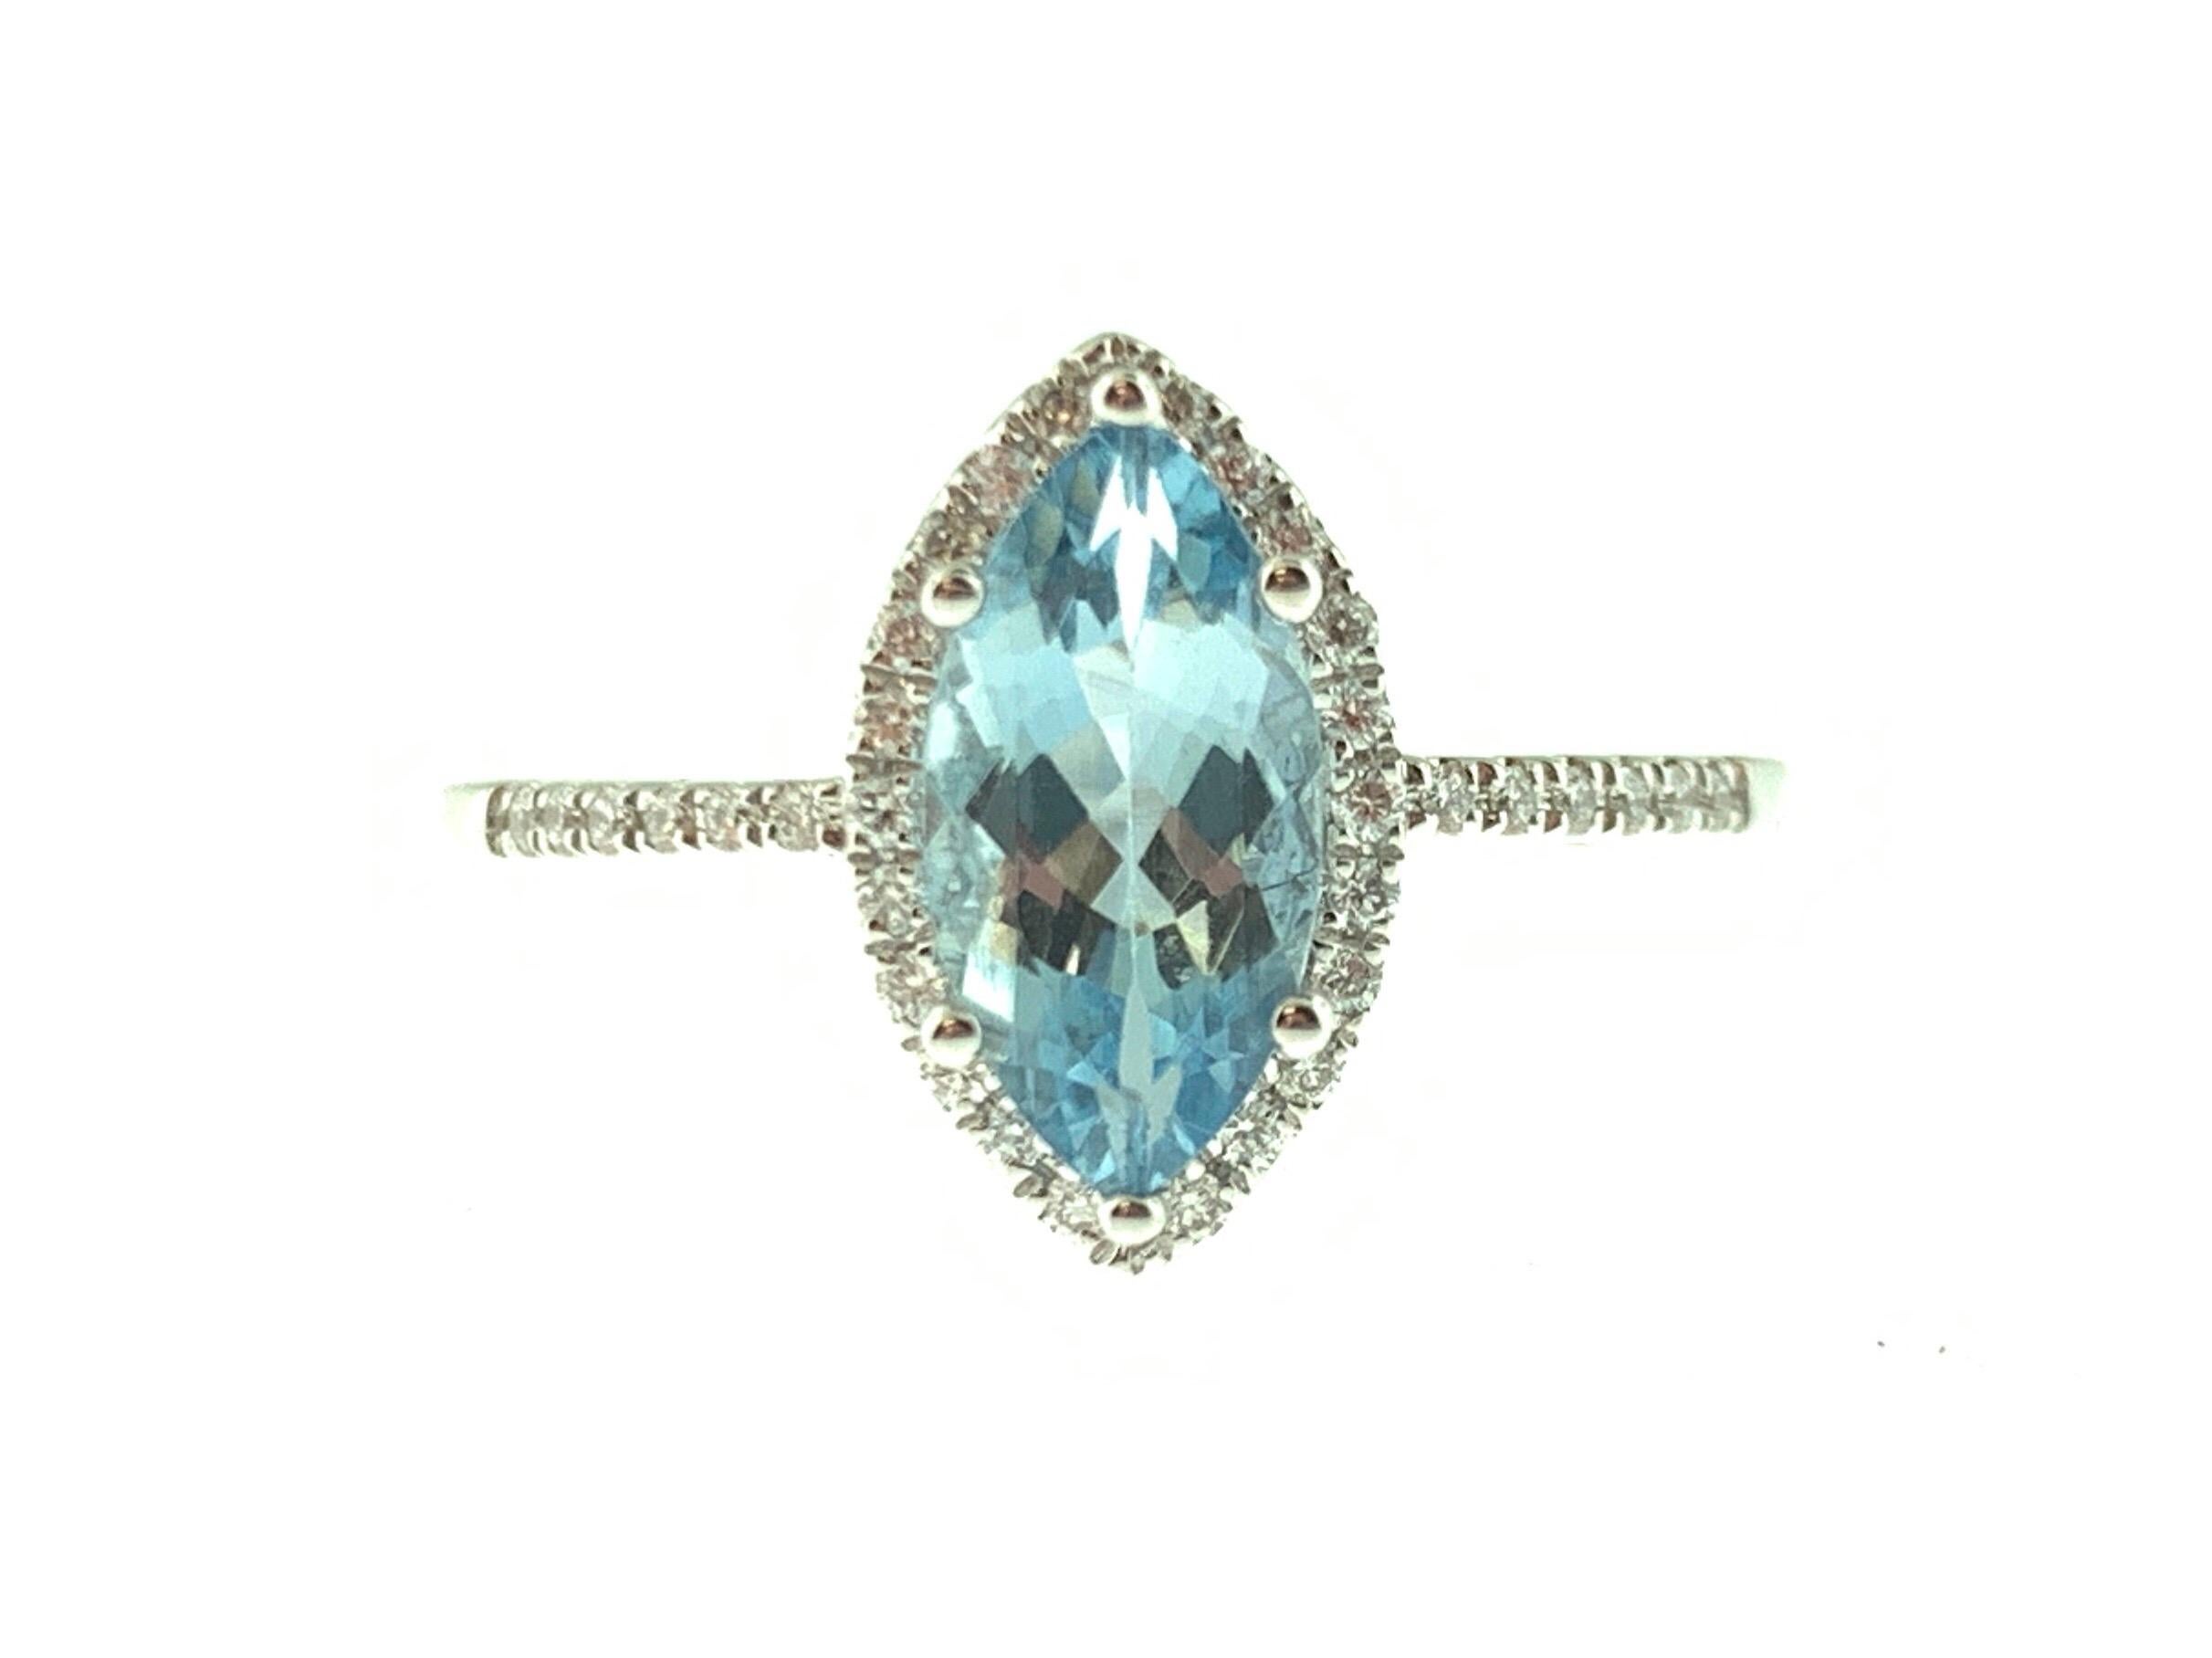 This stunning cocktail ring showcases a beautiful 0.85 Carat Marquise Aquamarine with a Diamond Halo. The Aquamarine sits on a Diamond Shank and is set in 14k White Gold. Total Diamond Weight = 0.13 Carats. Ring Size is 6 1/2.